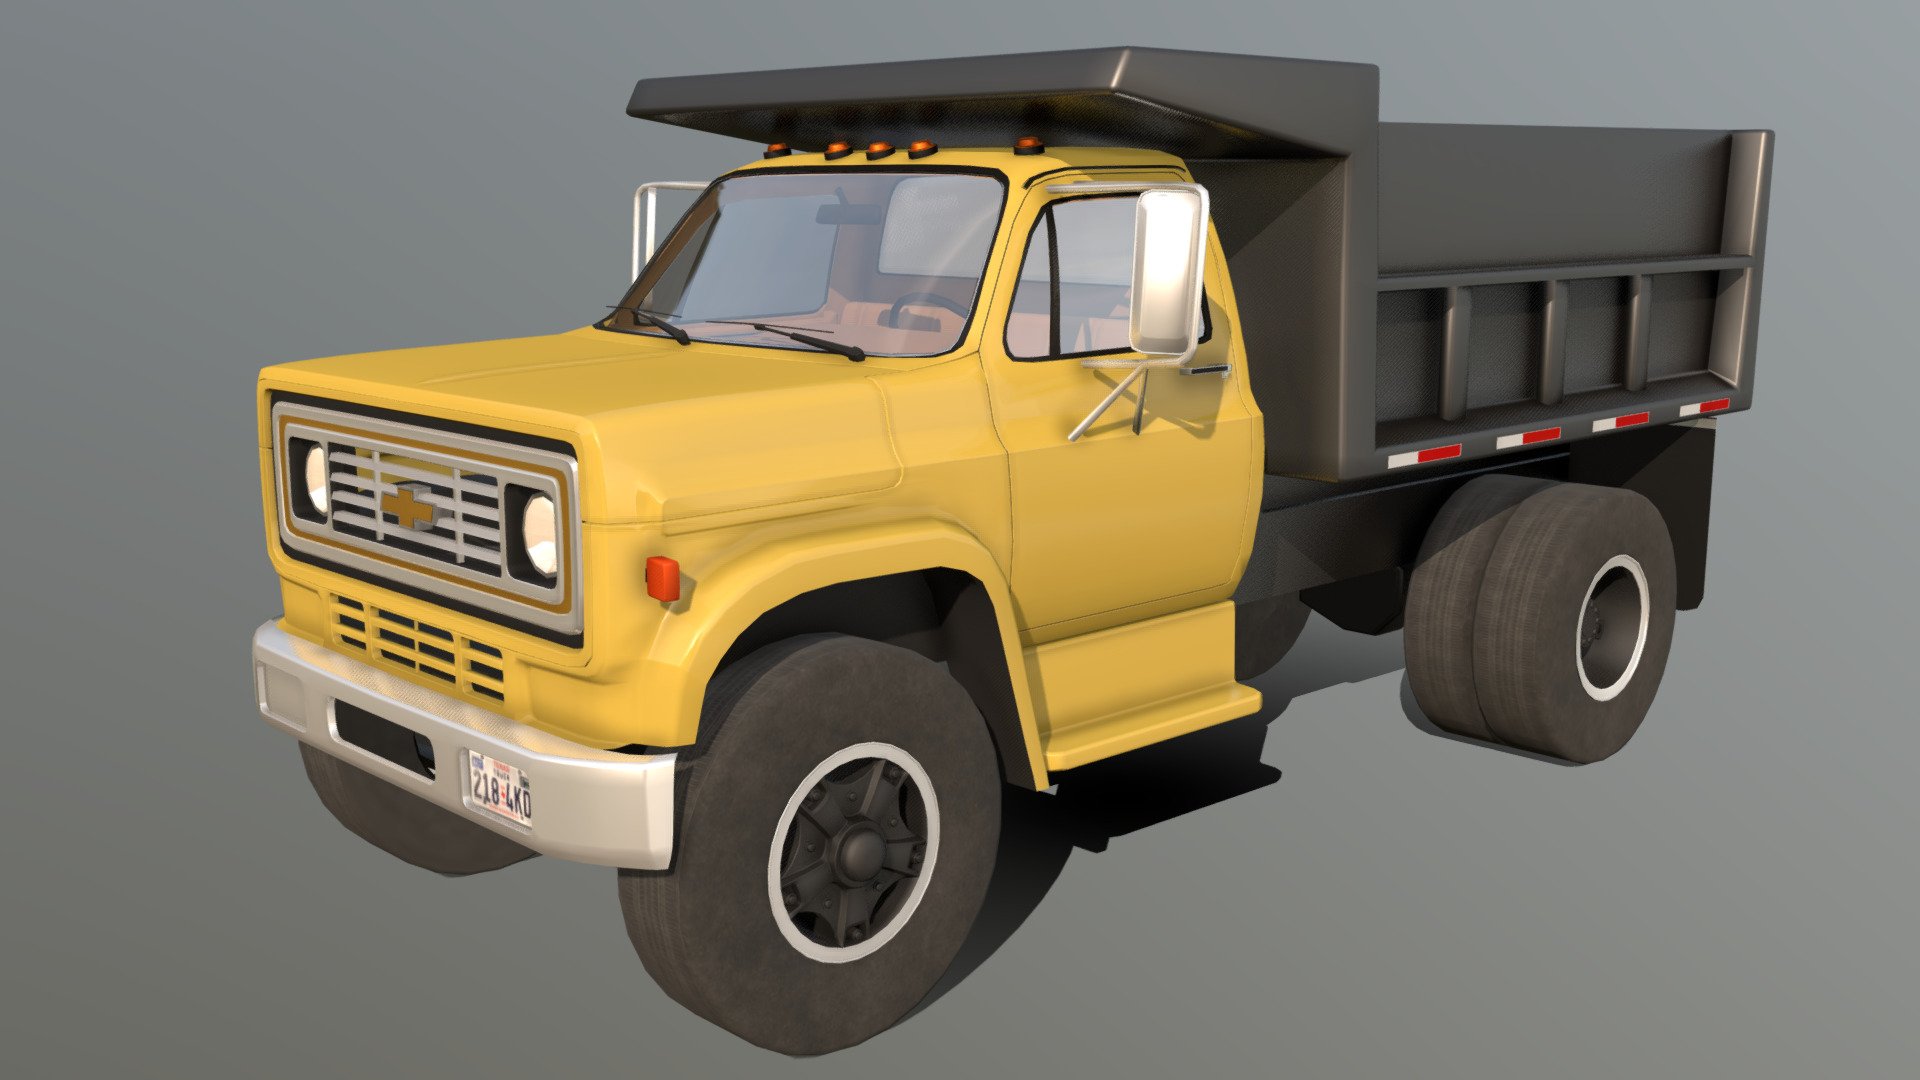 Mid-poly model of a 1981-1990 Chevrolet Kodiak dump truck. All scratch modelled by me. 

Exterior - 22,305 tris

Interior - 10,834 tris

Wheels and tires - 19,682 tris

Low poly chassis - 1,296 tris

Total - 53,639 tris - Chevrolet C70 Dump Truck - 3D model by n1ck (@captainpisslord) 3d model